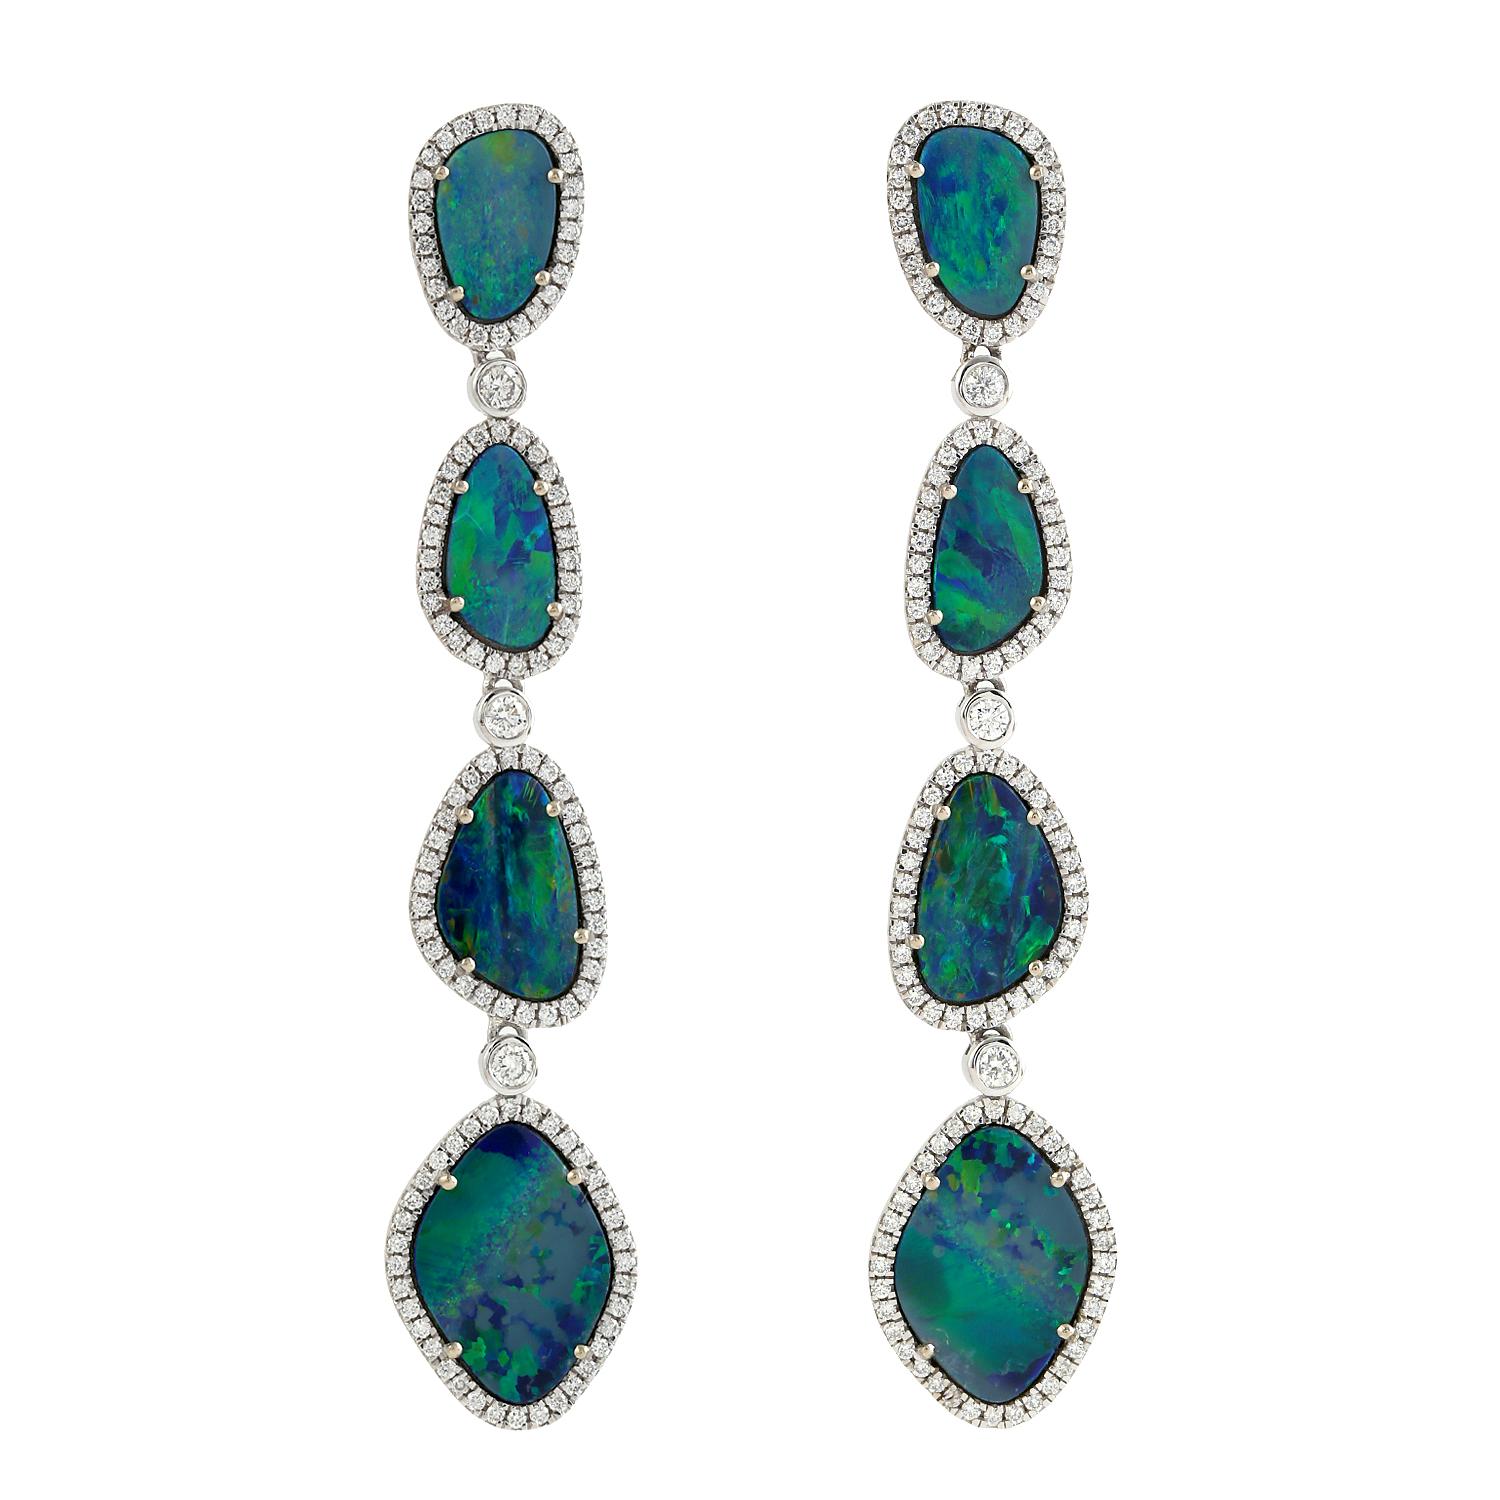 Mixed Cut Doublet Opal Multi Tier Dangle Earrings With Diamonds Made In 18k White Gold For Sale